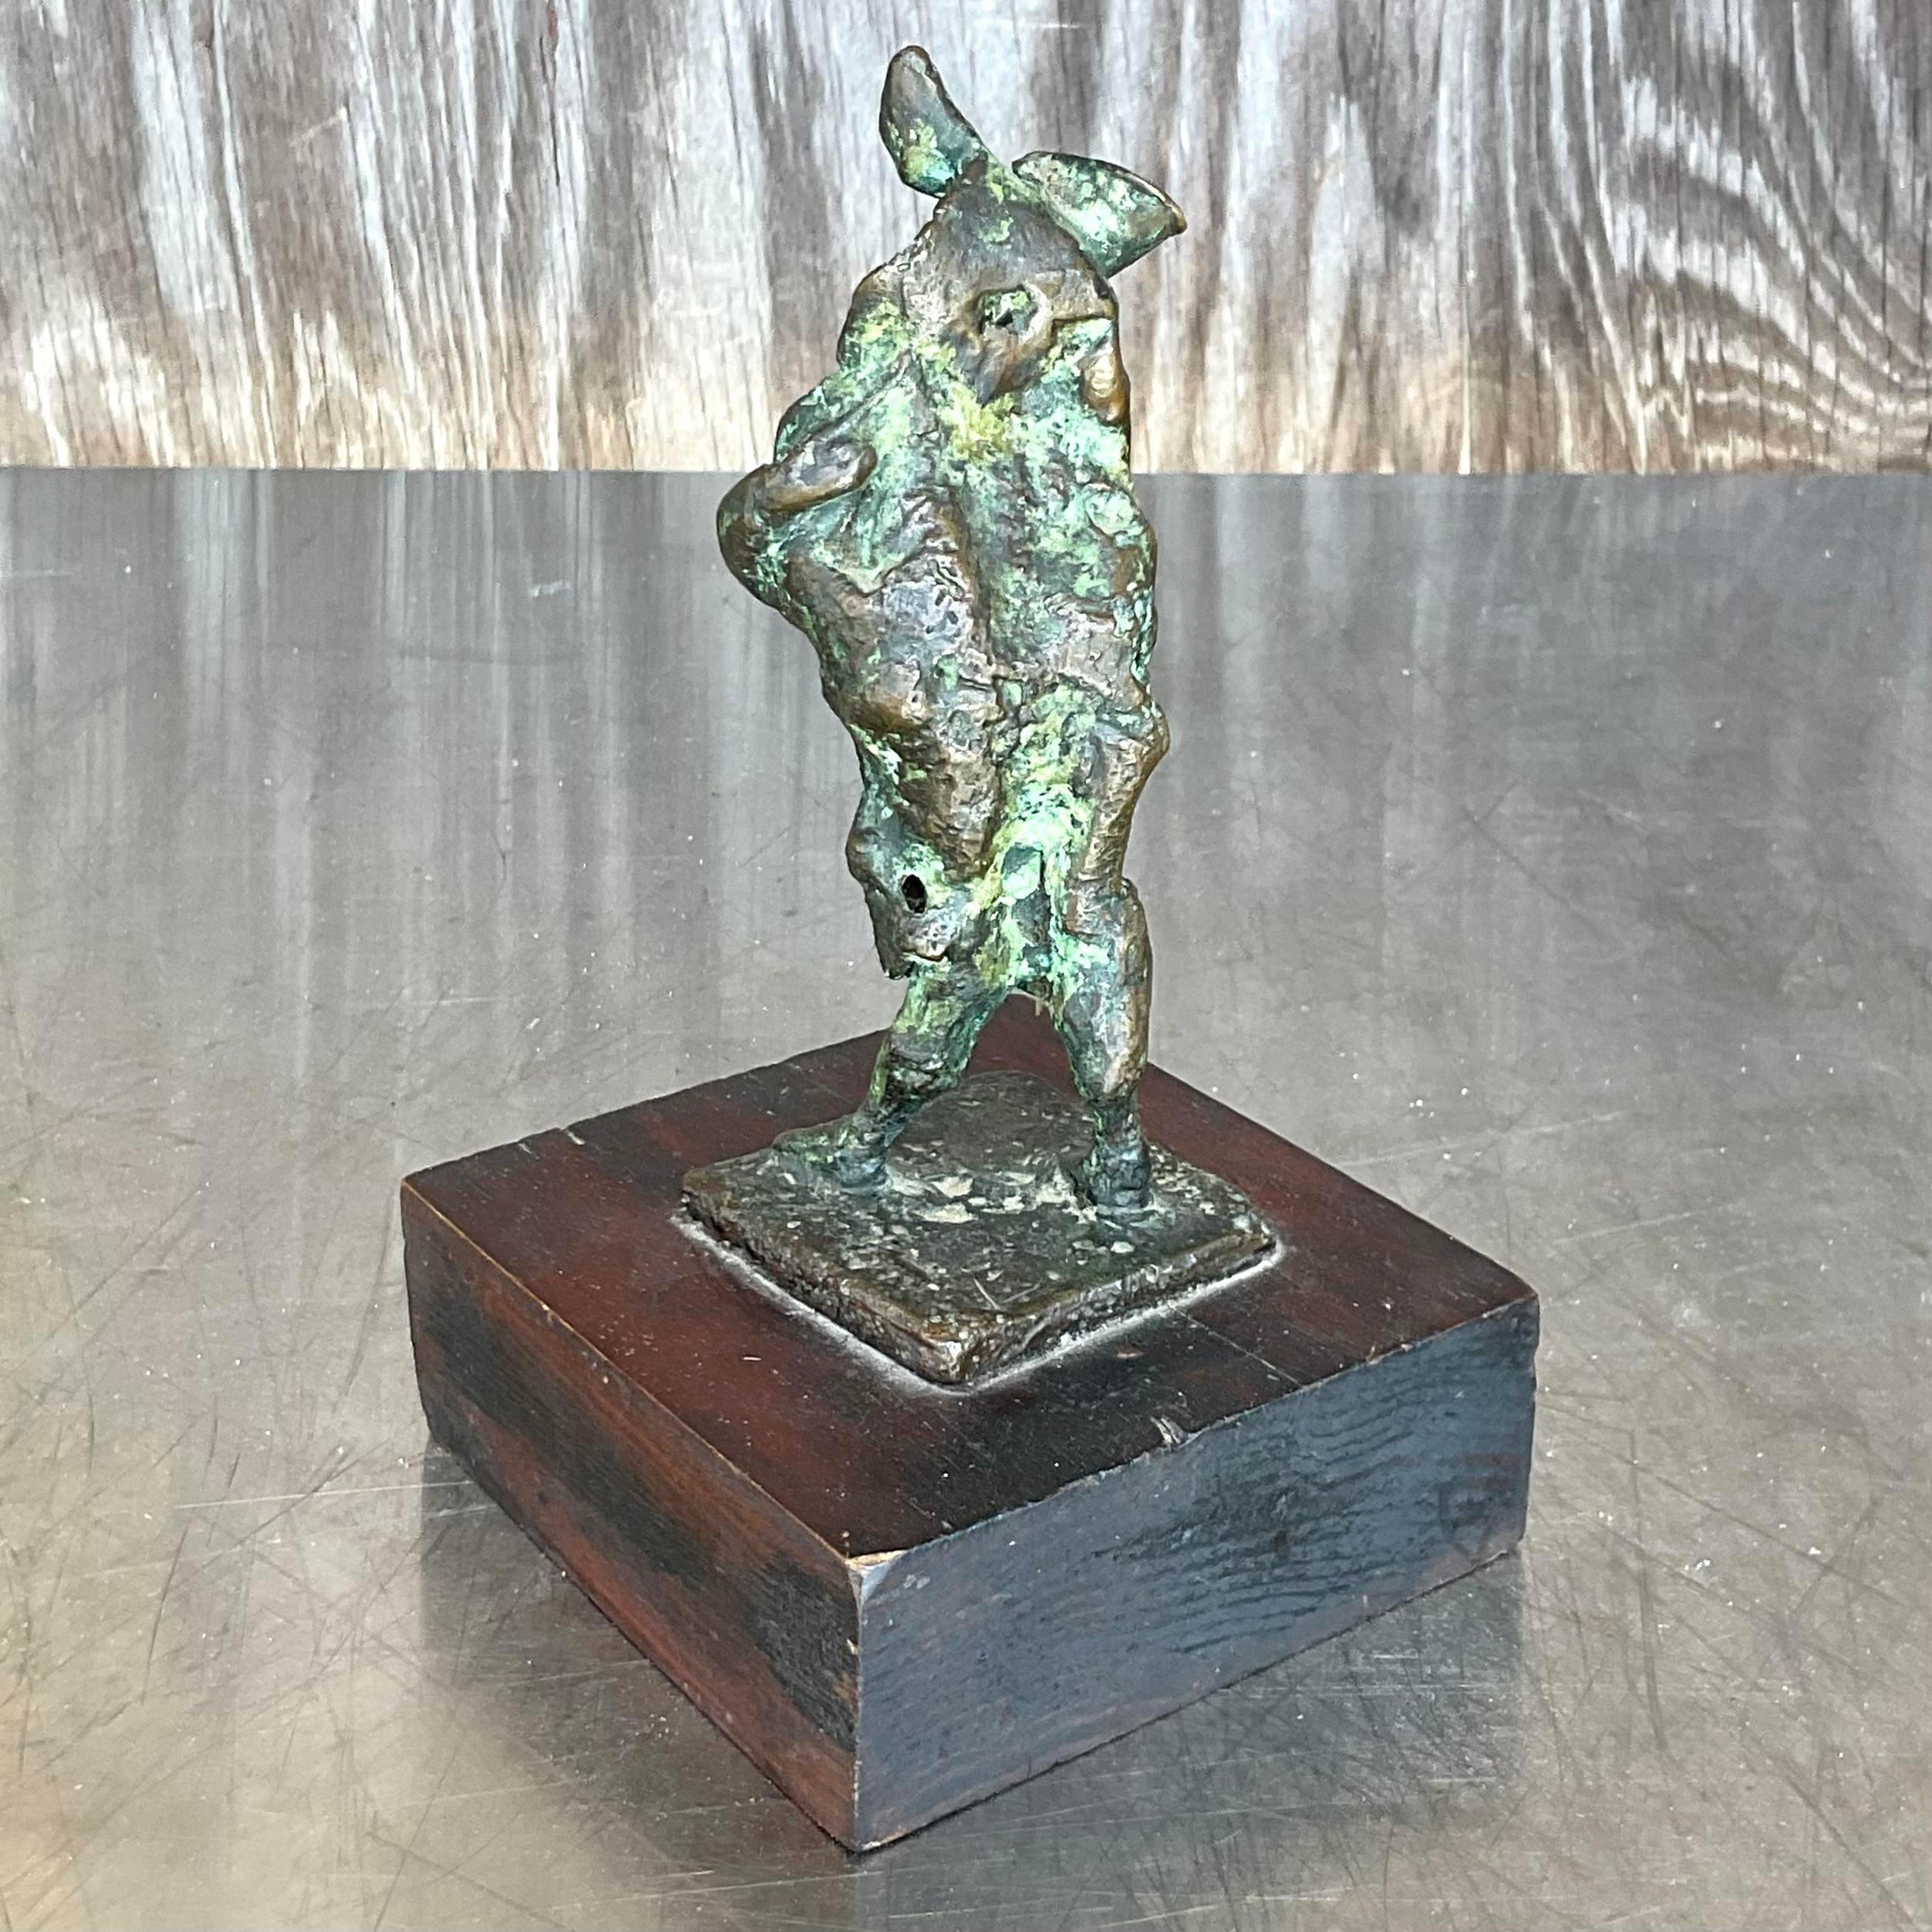 A fantastic vintage Boho bronze sculpture. A chic little abstract figure with great patina from time. Signed and dated on the plinth. Acquired from a Palm Beach estate.